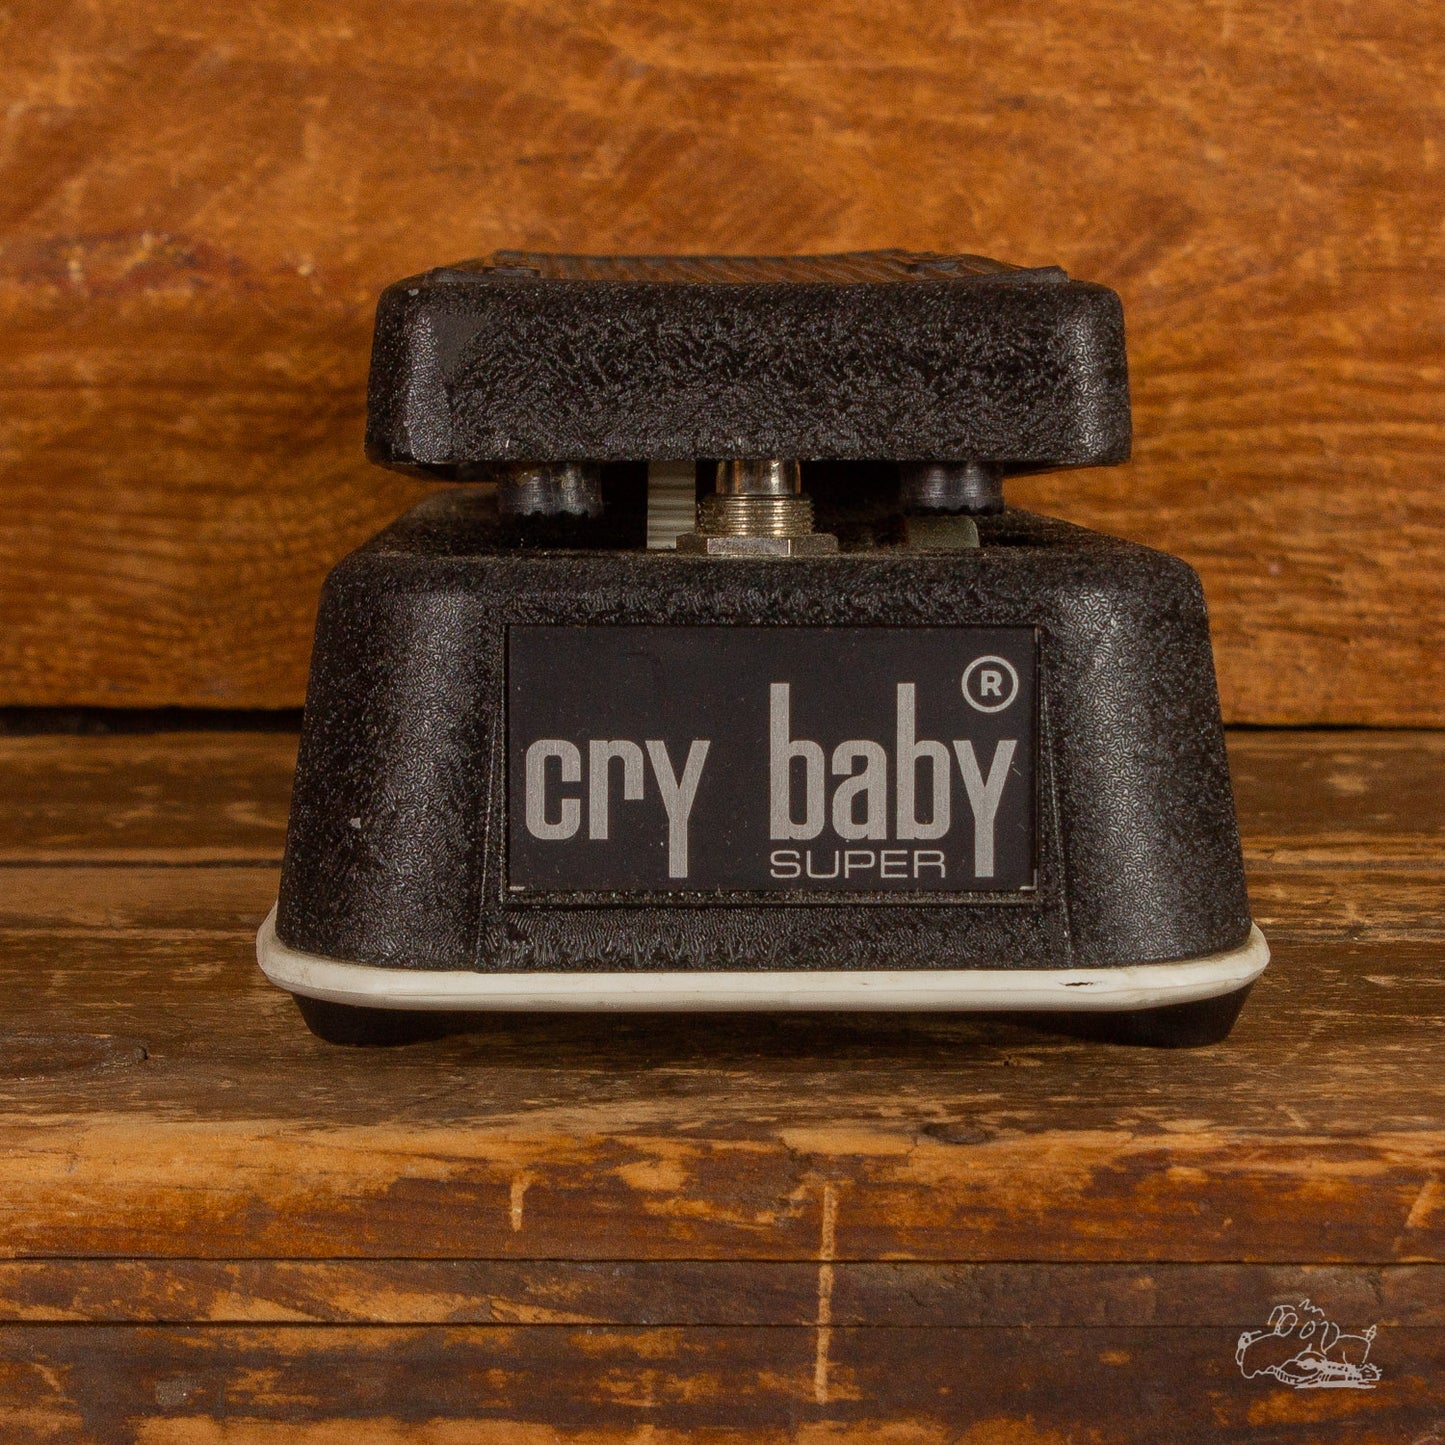 Jen Cry Baby Super Wah Pedal